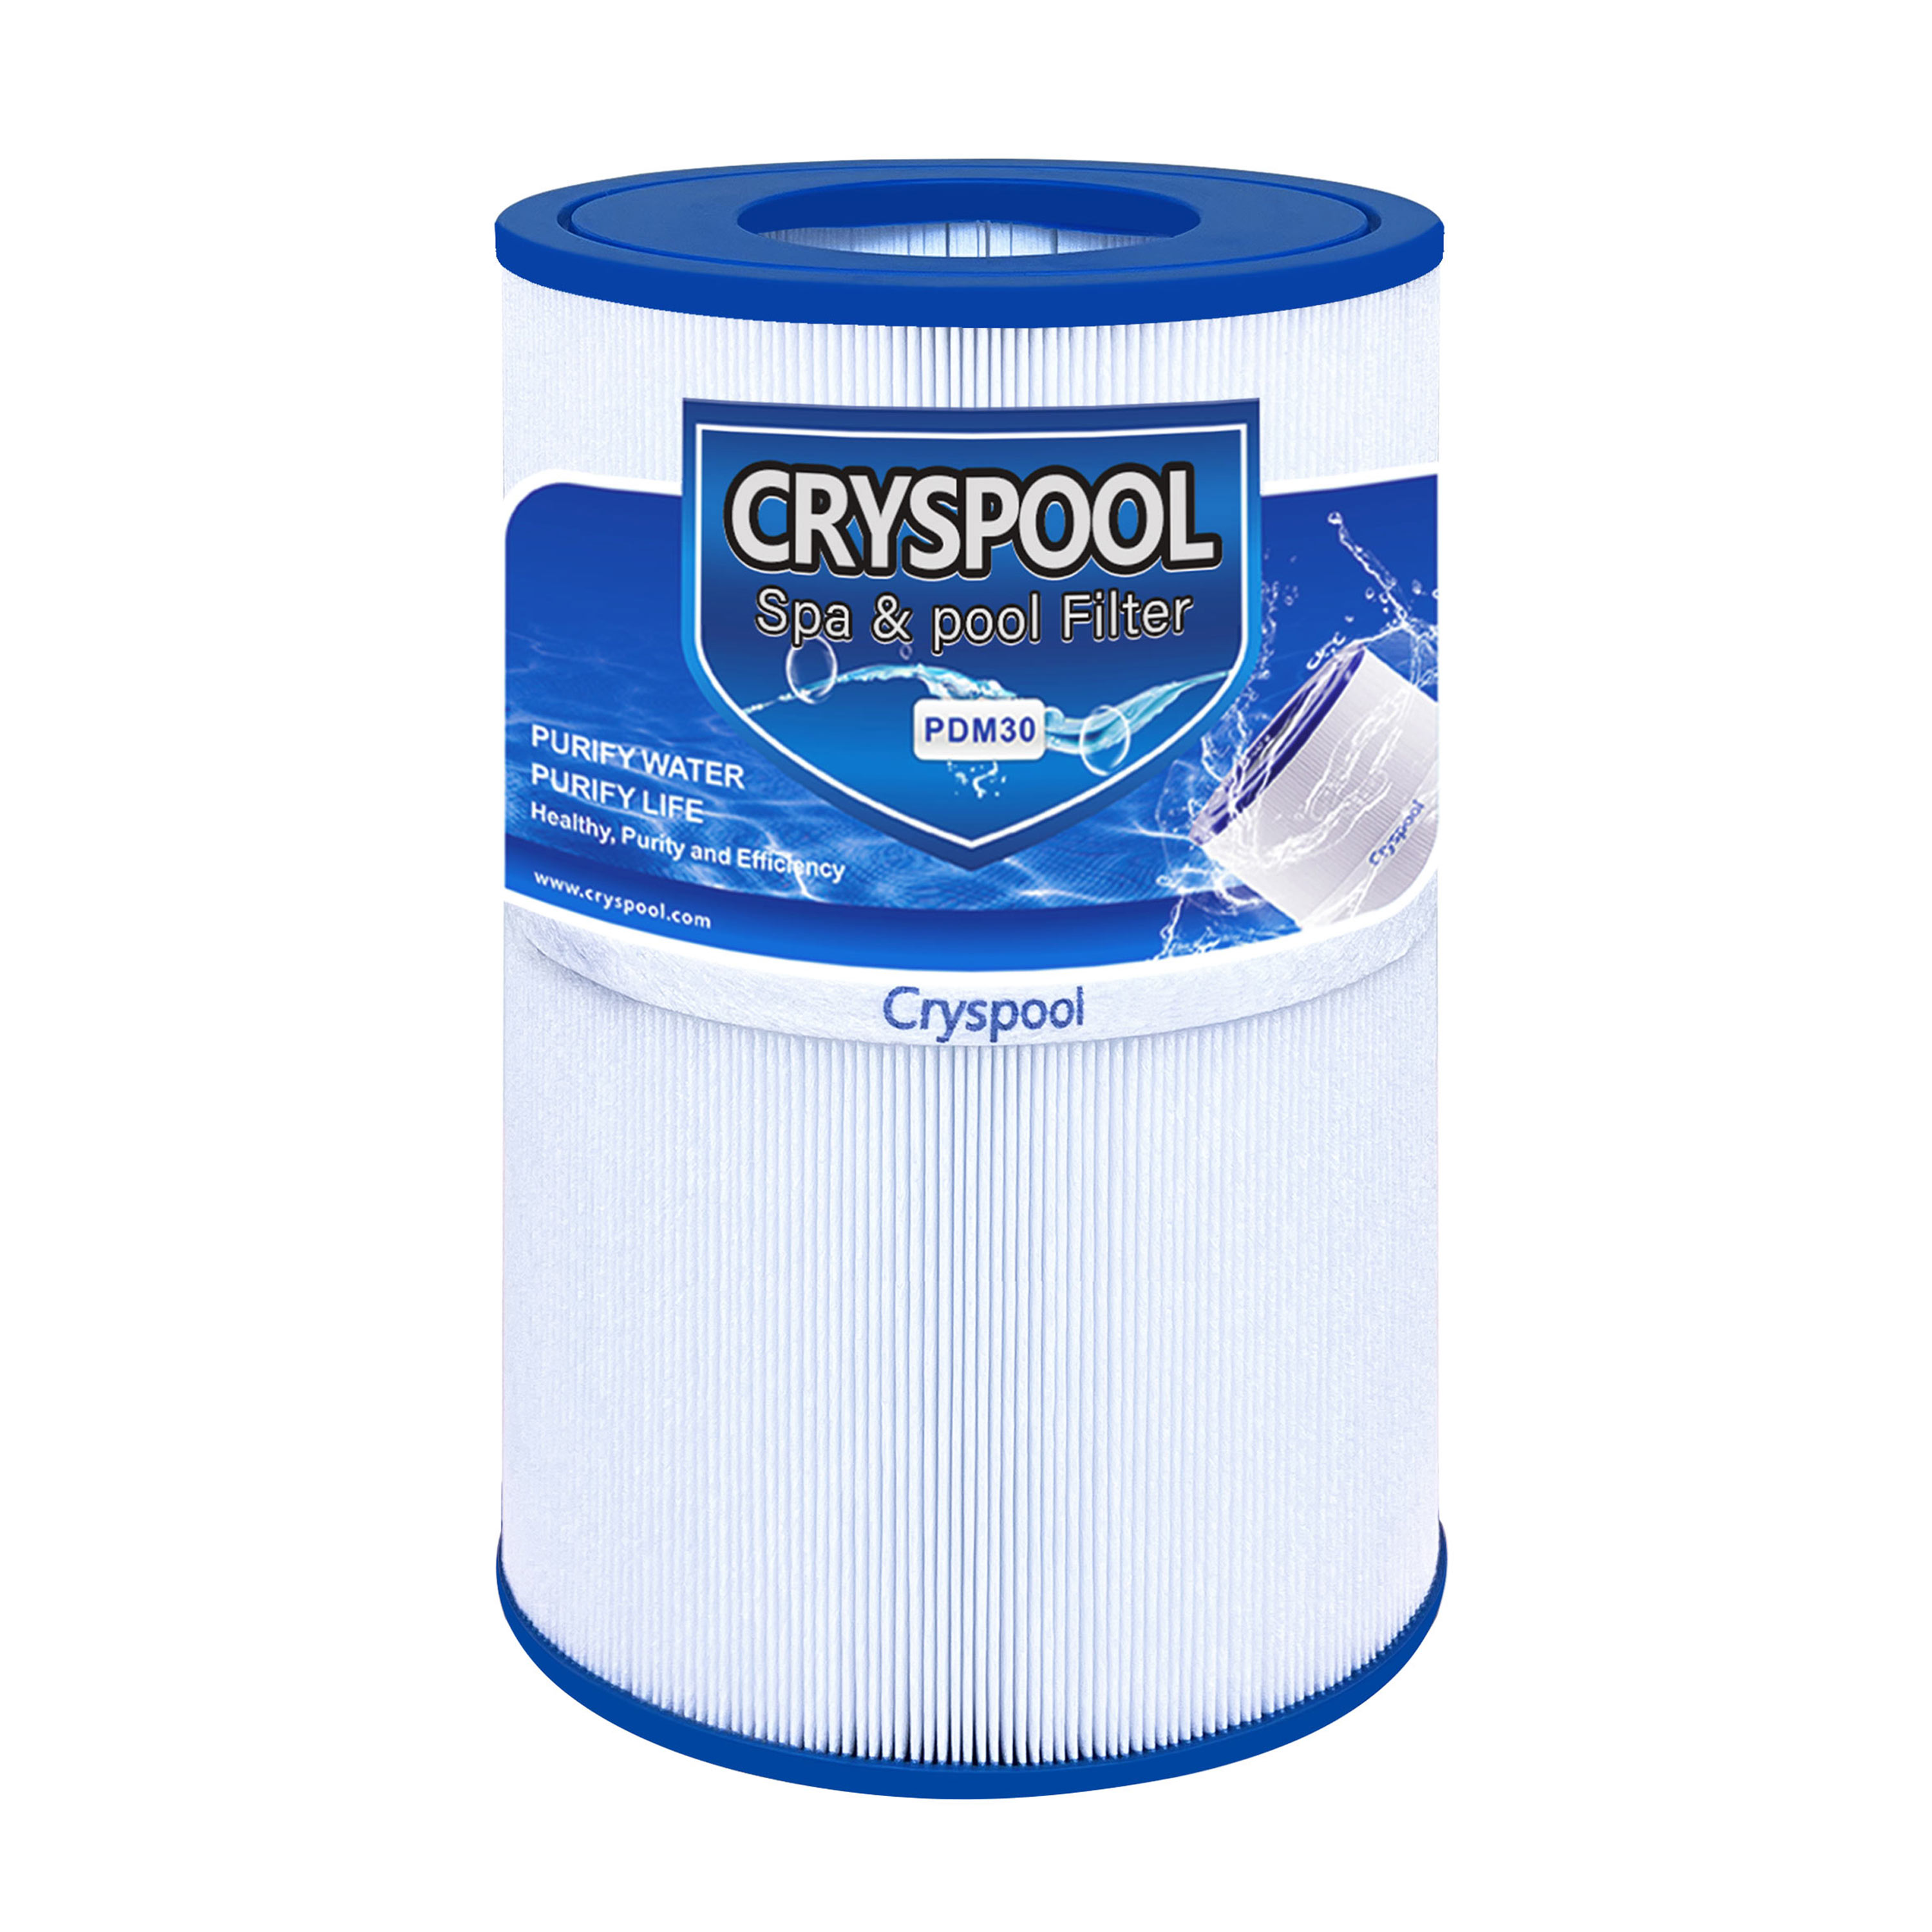 China New Product Jacuzzi Tub Filter Replacement - Cryspool Spa Filter Compatible with Pleatco PDM30, 461269 – Cryspool